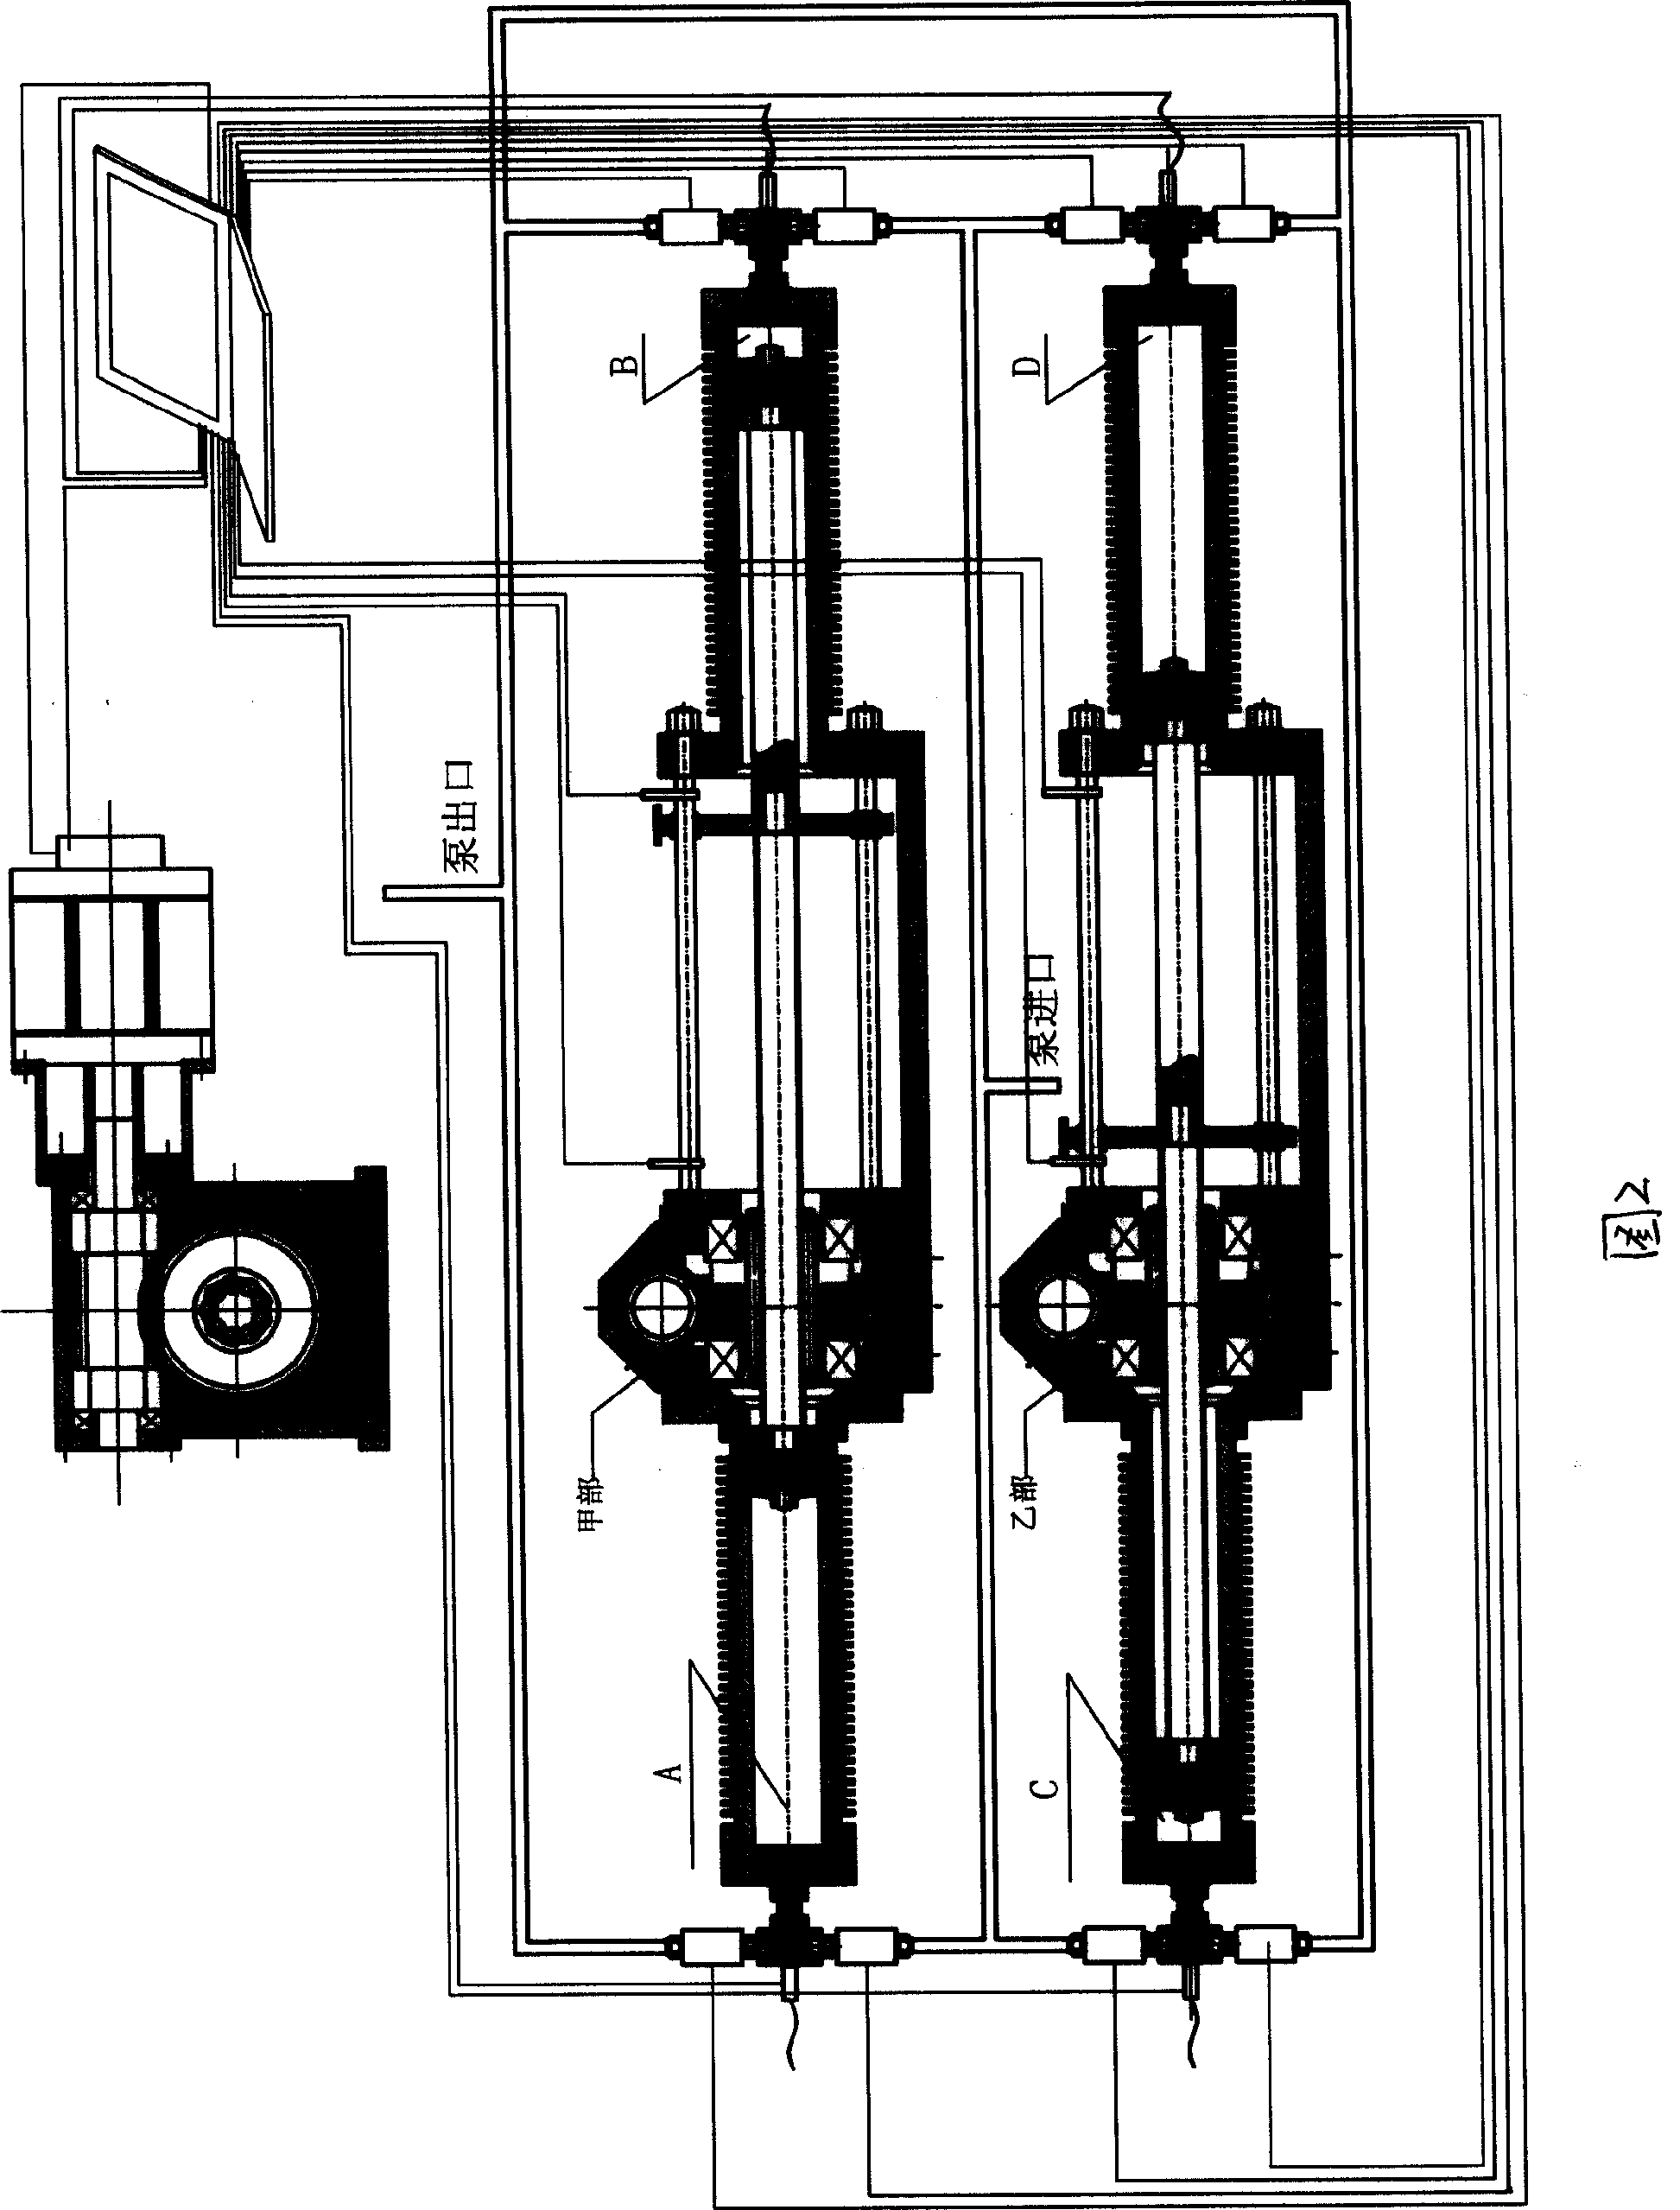 Metering pump with constant speed and constant pressure